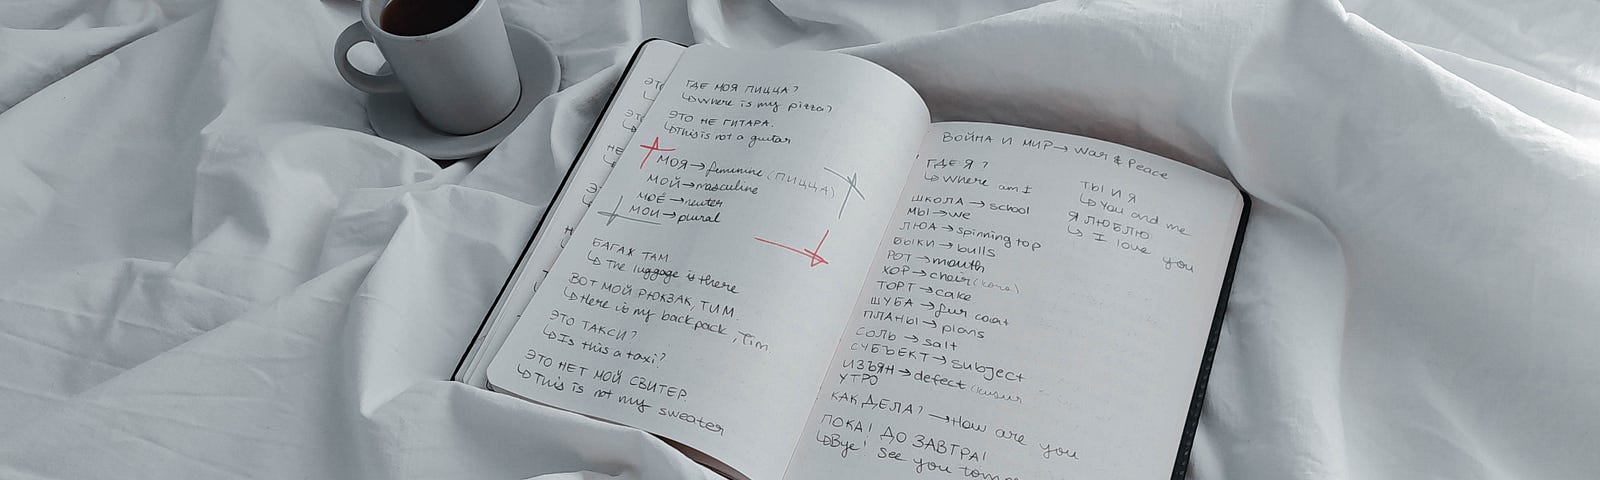 Image shows a journal with a list lying open on a crumpled white bed sheet. Cup of black coffee off to the upper left.